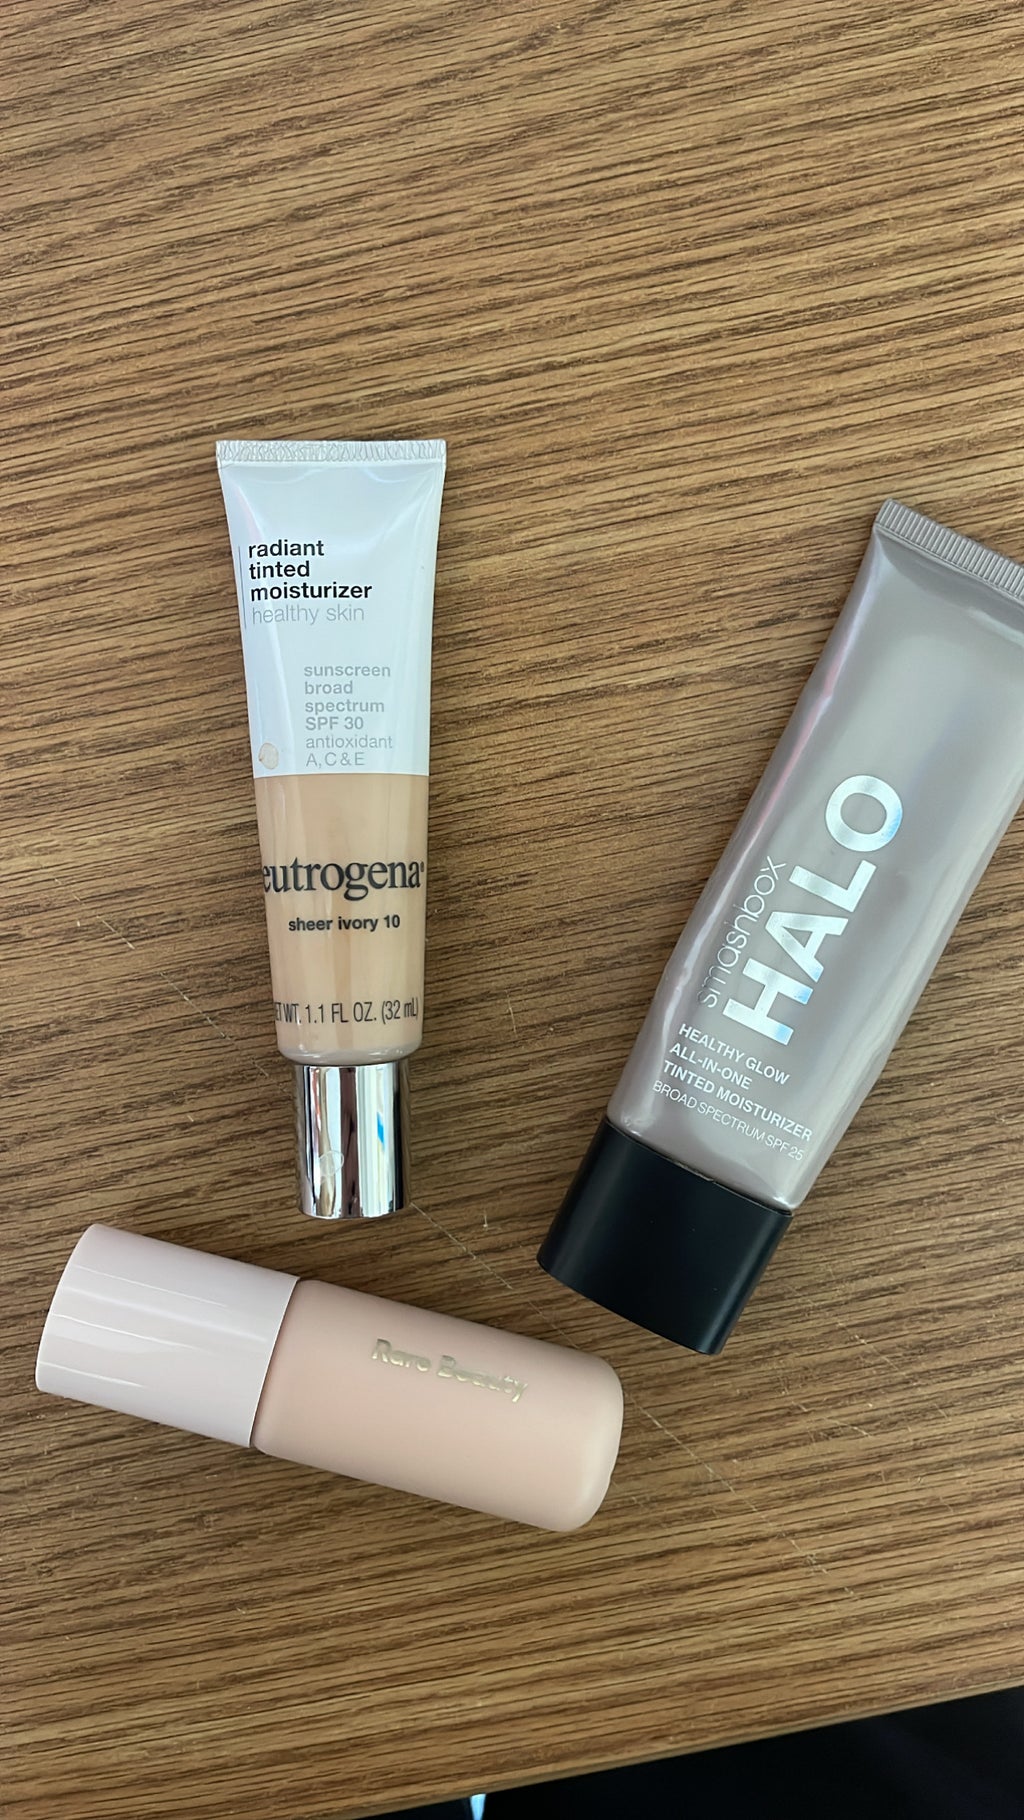 This is an image of three different tinted moisturizers for my Self Care Sunday Series